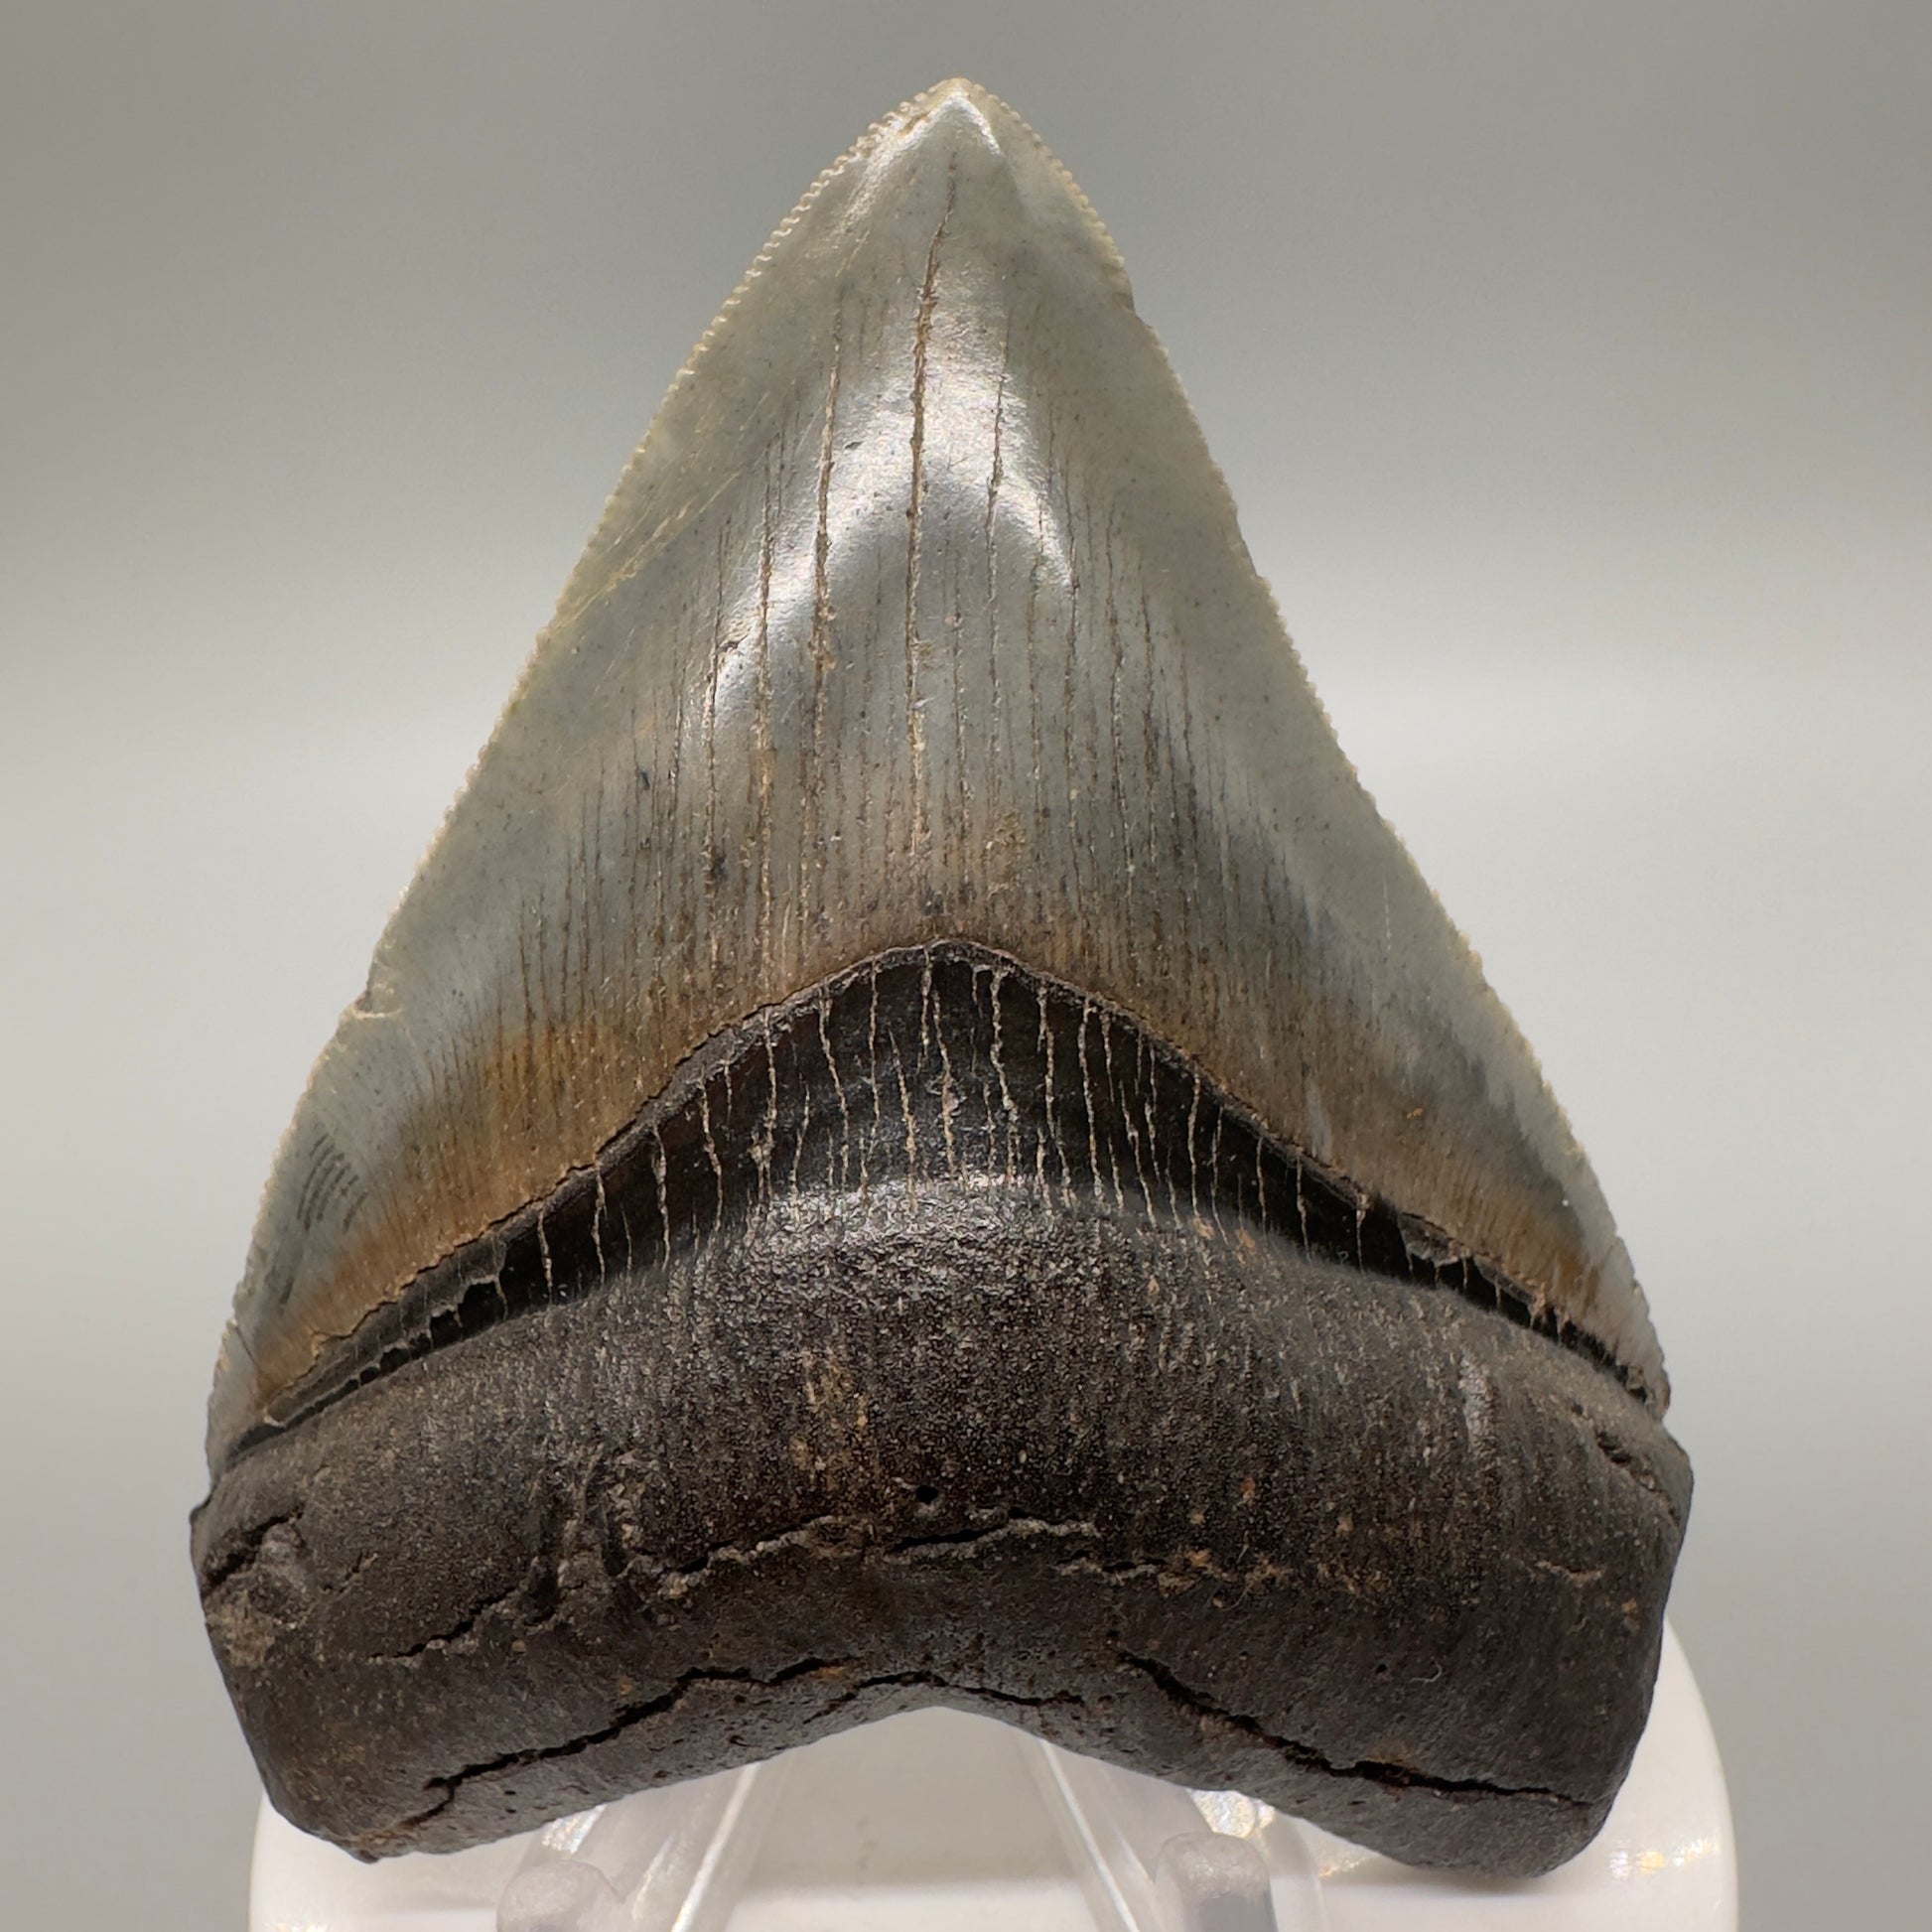 Heart shaped, serrated 3.21" Fossil Megalodon Tooth: Scuba Diving Discovery from Georgia CM4608 - Front